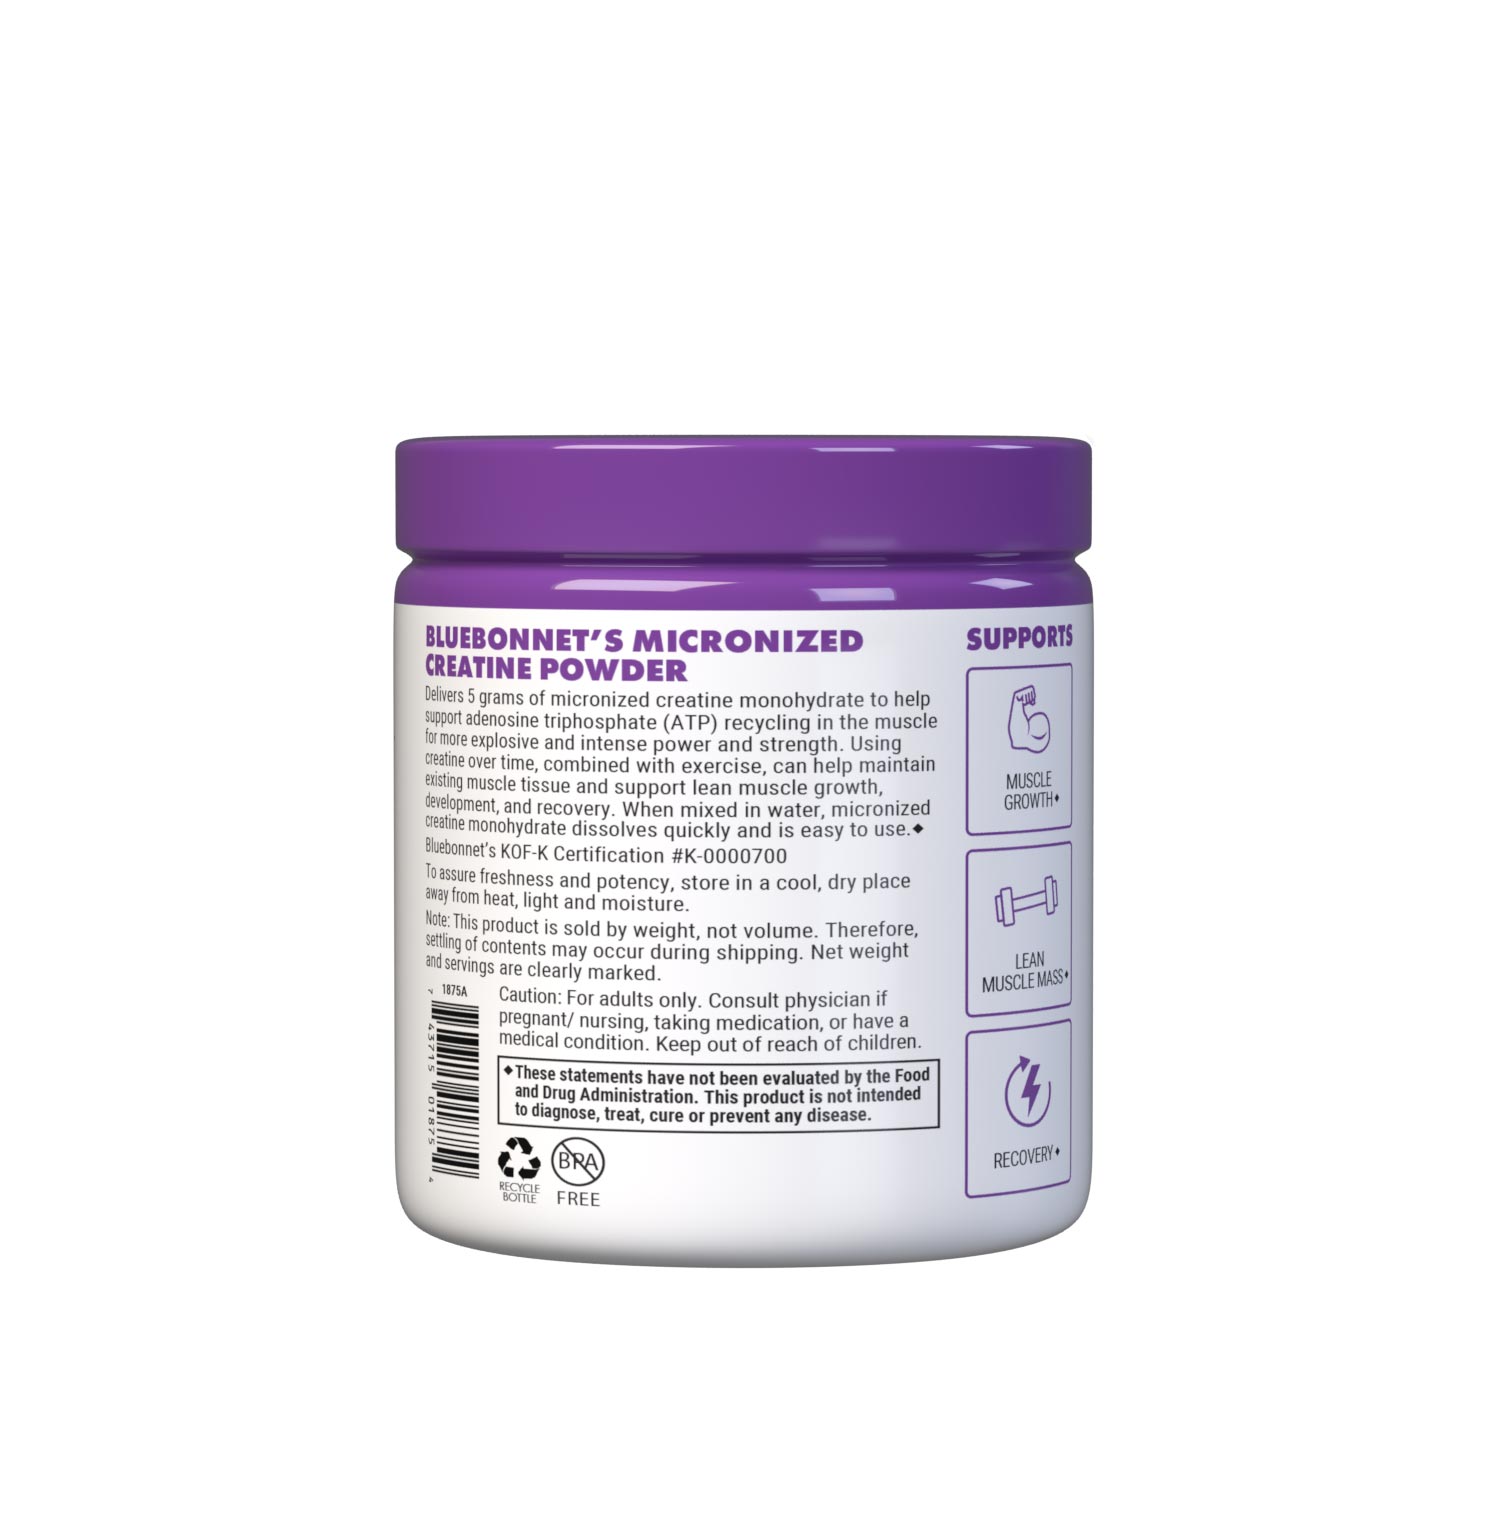 Bluebonnet's micronized creatine powder for muscle growth, lean muscle mass and fast recovery. Easy-to-mix unflavored powder. Description panel. #size_10.58 oz